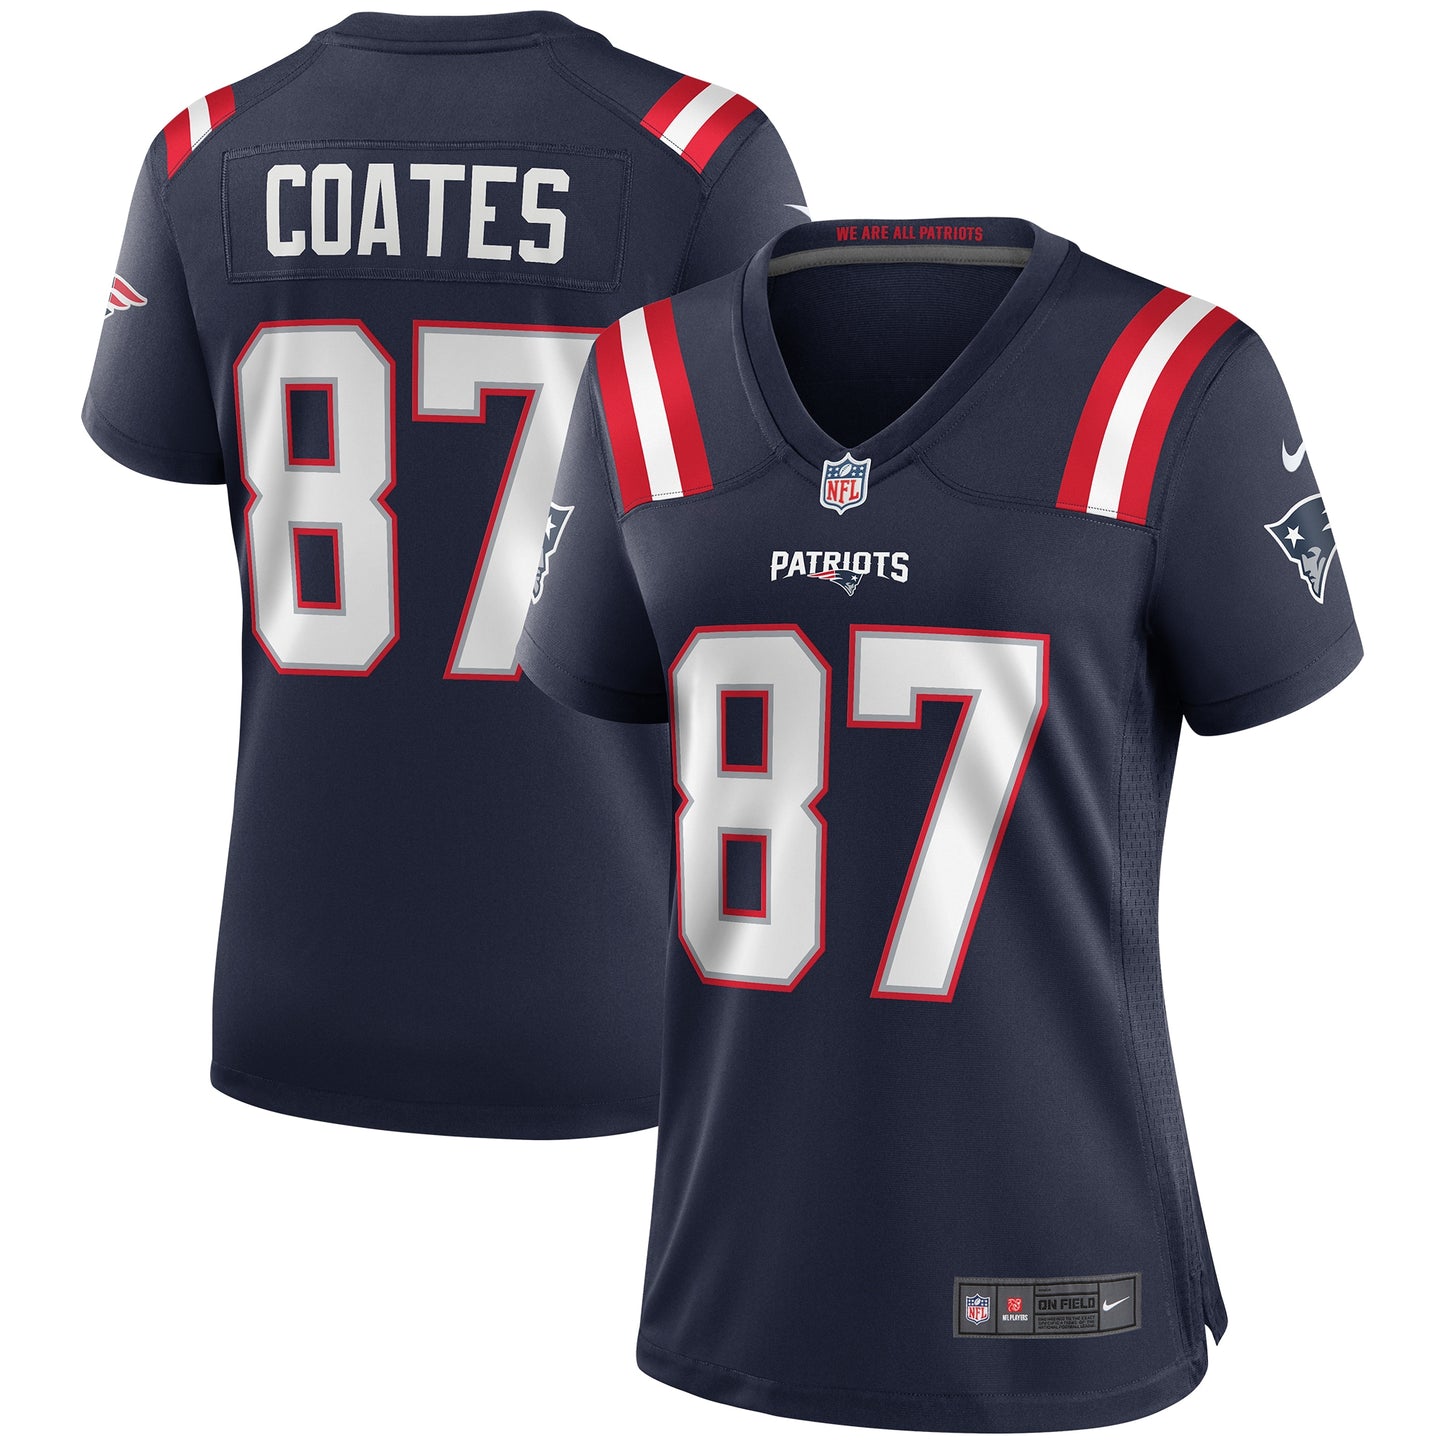 Ben Coates New England Patriots Nike Women's Game Retired Player Jersey - Navy